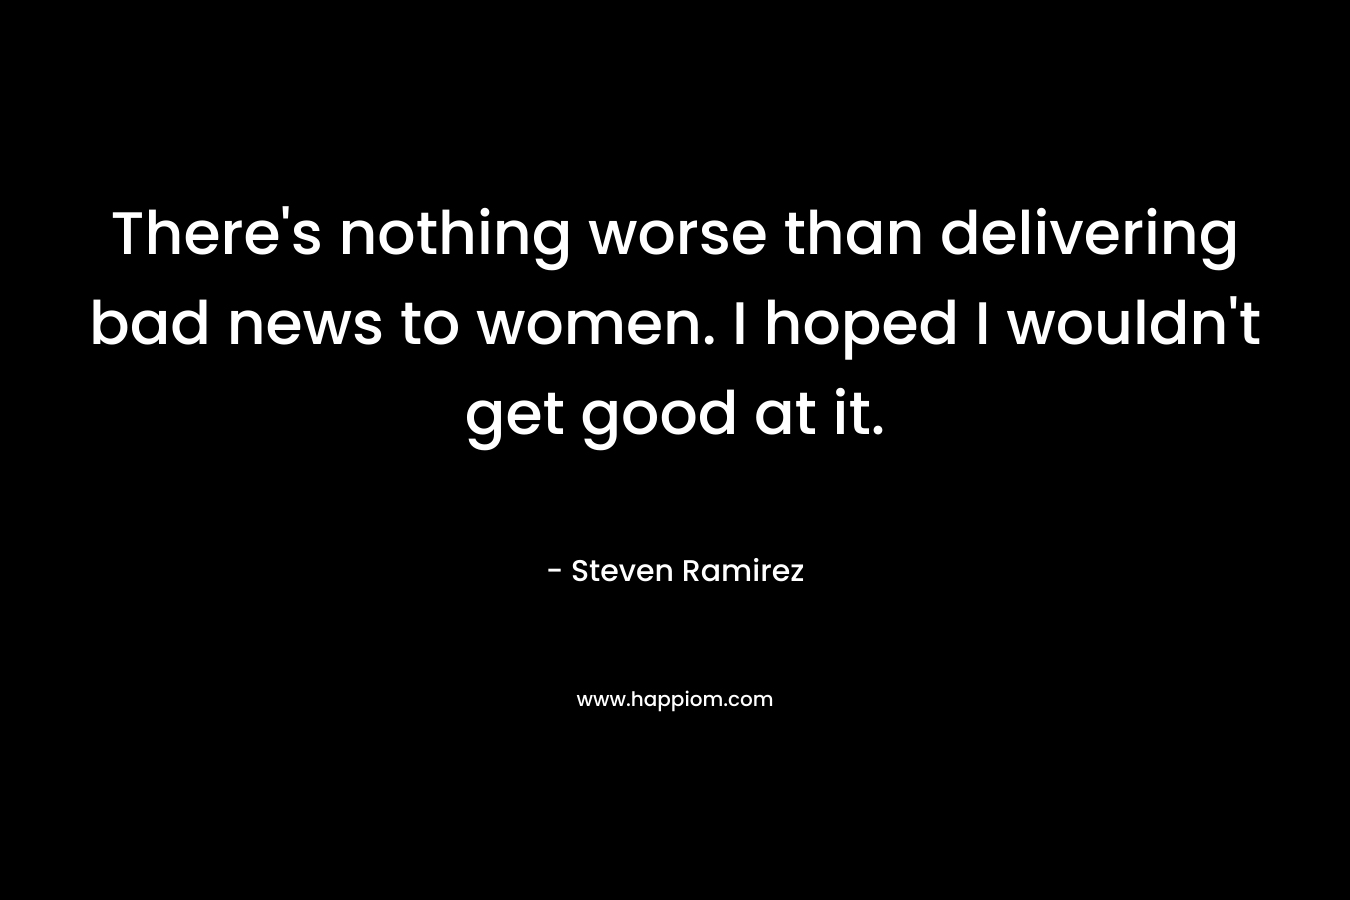 There’s nothing worse than delivering bad news to women. I hoped I wouldn’t get good at it. – Steven Ramirez